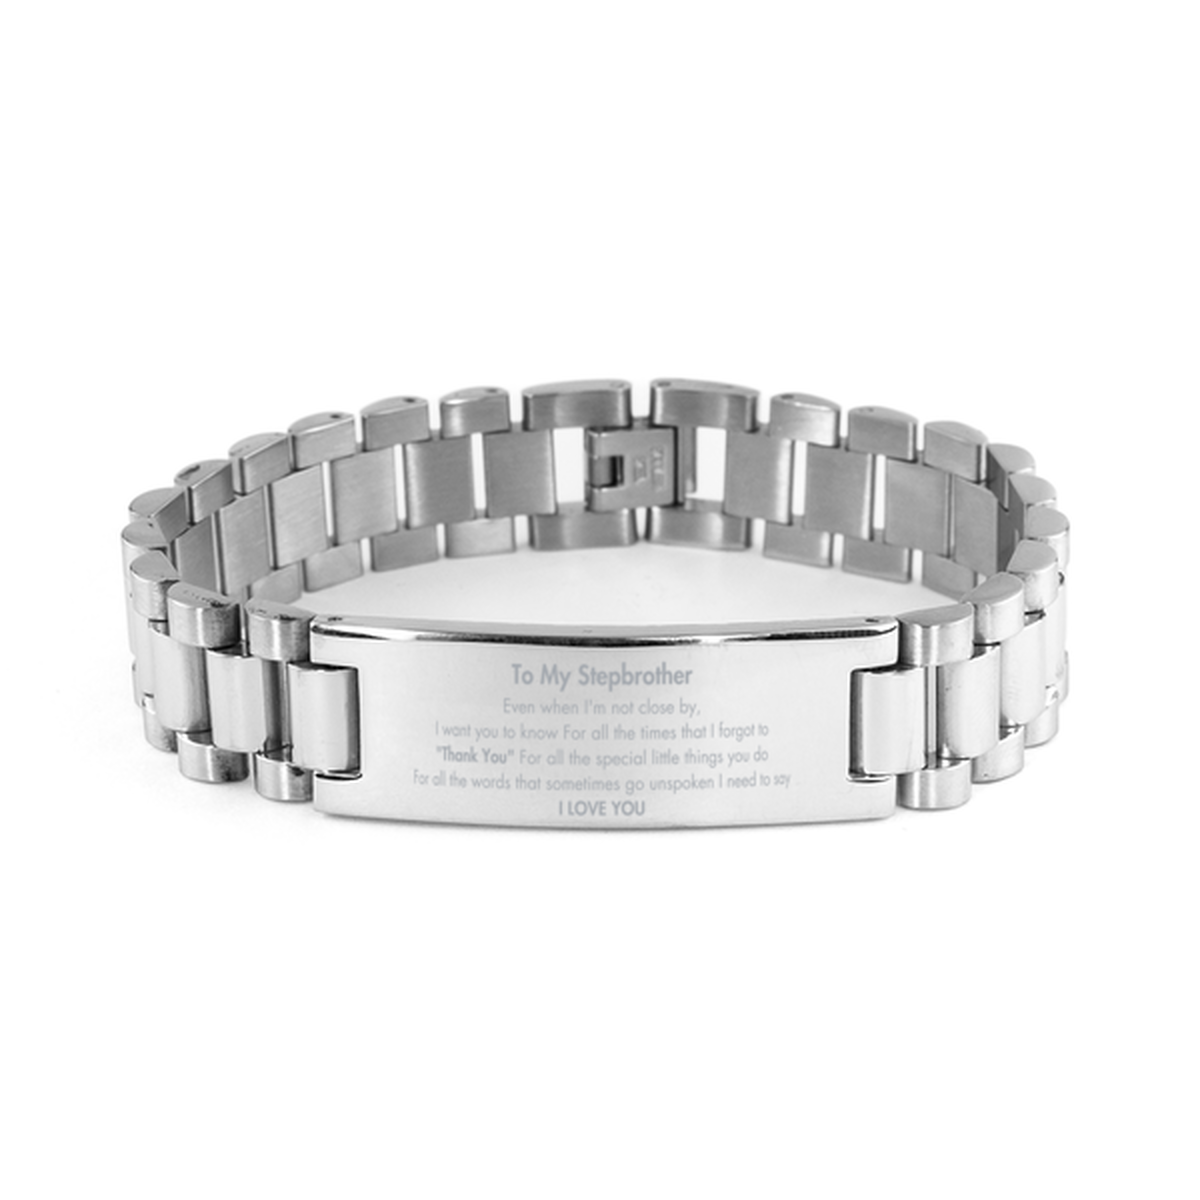 Thank You Gifts for Stepbrother, Keepsake Ladder Stainless Steel Bracelet Gifts for Stepbrother Birthday Mother's day Father's Day Stepbrother For all the words That sometimes go unspoken I need to say I LOVE YOU